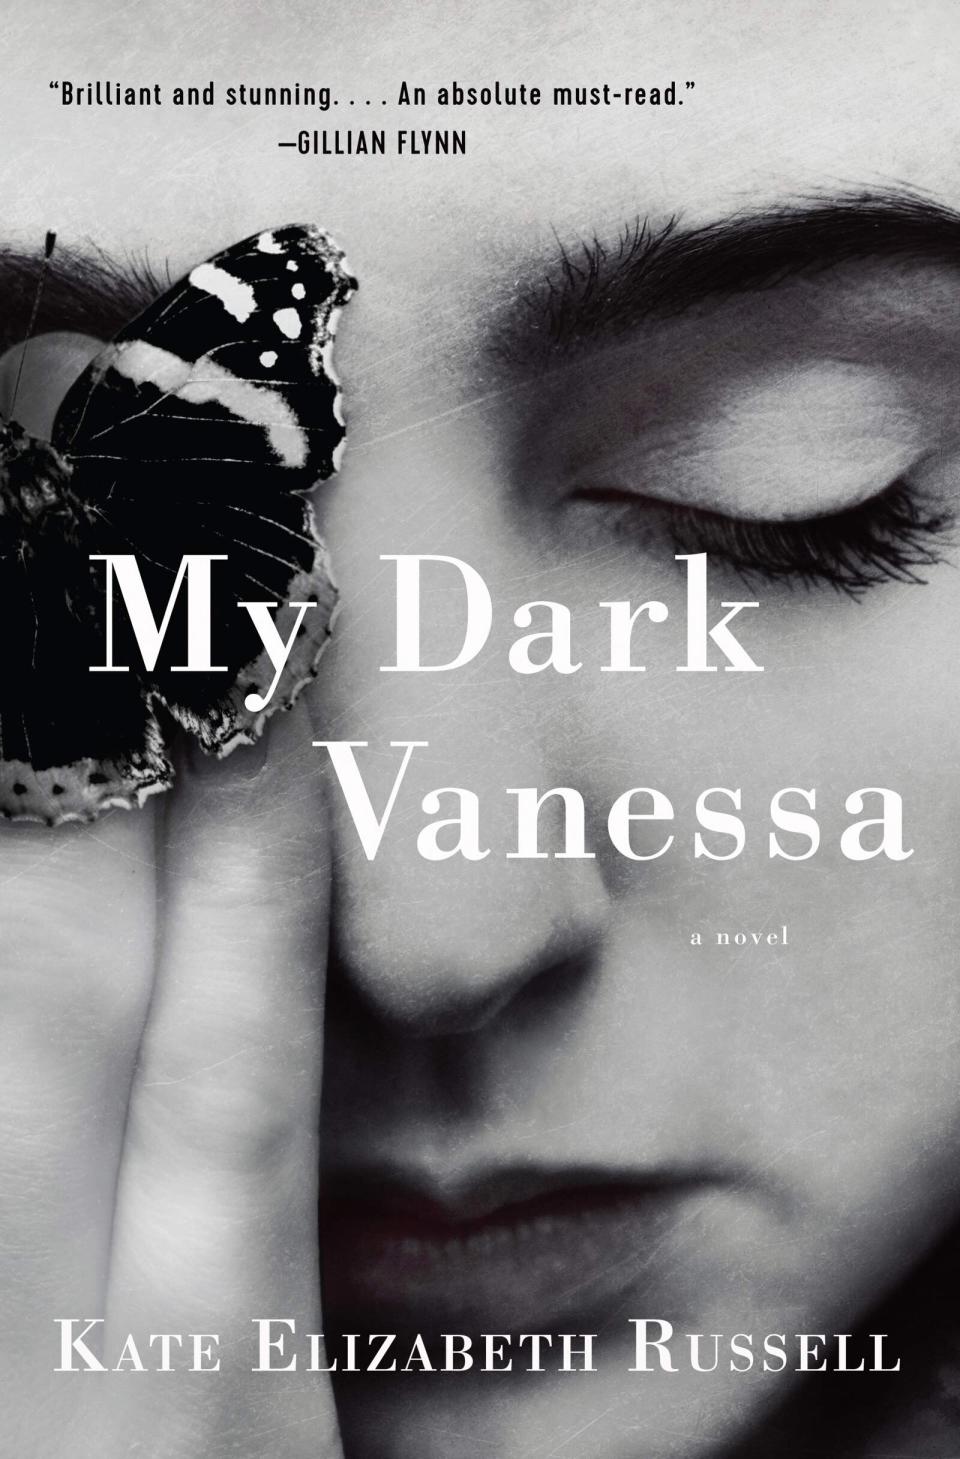 At the age of 15, Vanessa Wye begins a love affair with her 42-year-old English teacher. Almost two decades later, when he&rsquo;s accused of sexual abuse by a former student, Vanessa begins to re-think and reflect on their past relationship. In a book fitting the #MeToo movement, &ldquo;My Dark Vanessa&rdquo; alternates between the title character&rsquo;s past and present, bringing up questions about agency, consent, victimhood and complicity. Read more about it on <a href="https://www.goodreads.com/book/show/44890081-my-dark-vanessa" target="_blank" rel="noopener noreferrer">Goodreads</a>, and <a href="https://amzn.to/2TtNomF" target="_blank" rel="noopener noreferrer">grab a copy on Amazon</a>.<br /><br /><i>Expected release date: March 10</i>